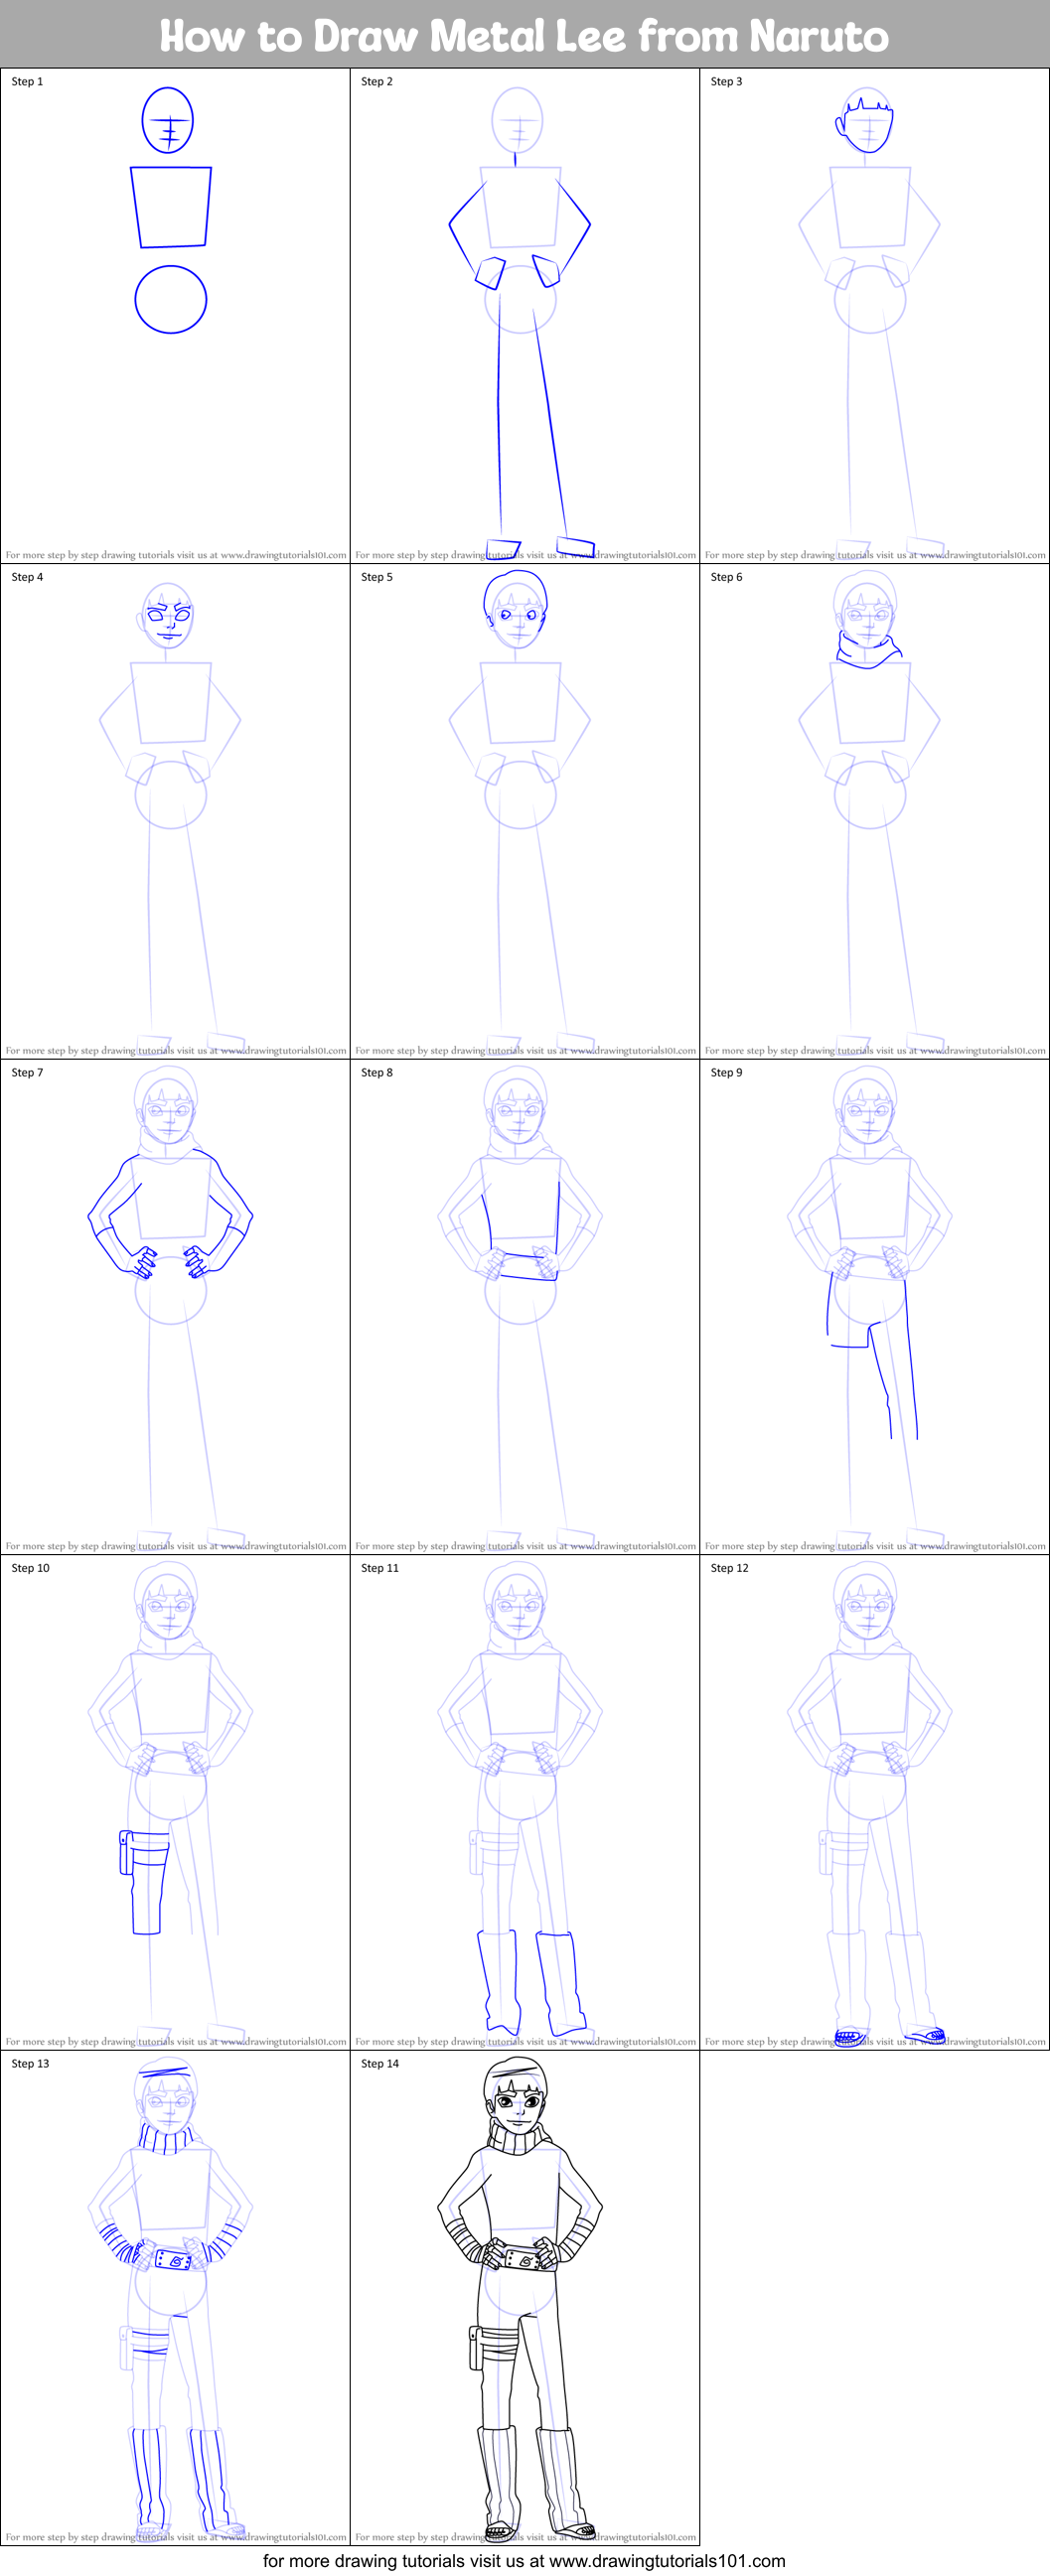 How to Draw Metal Lee from Naruto printable step by step drawing sheet ...